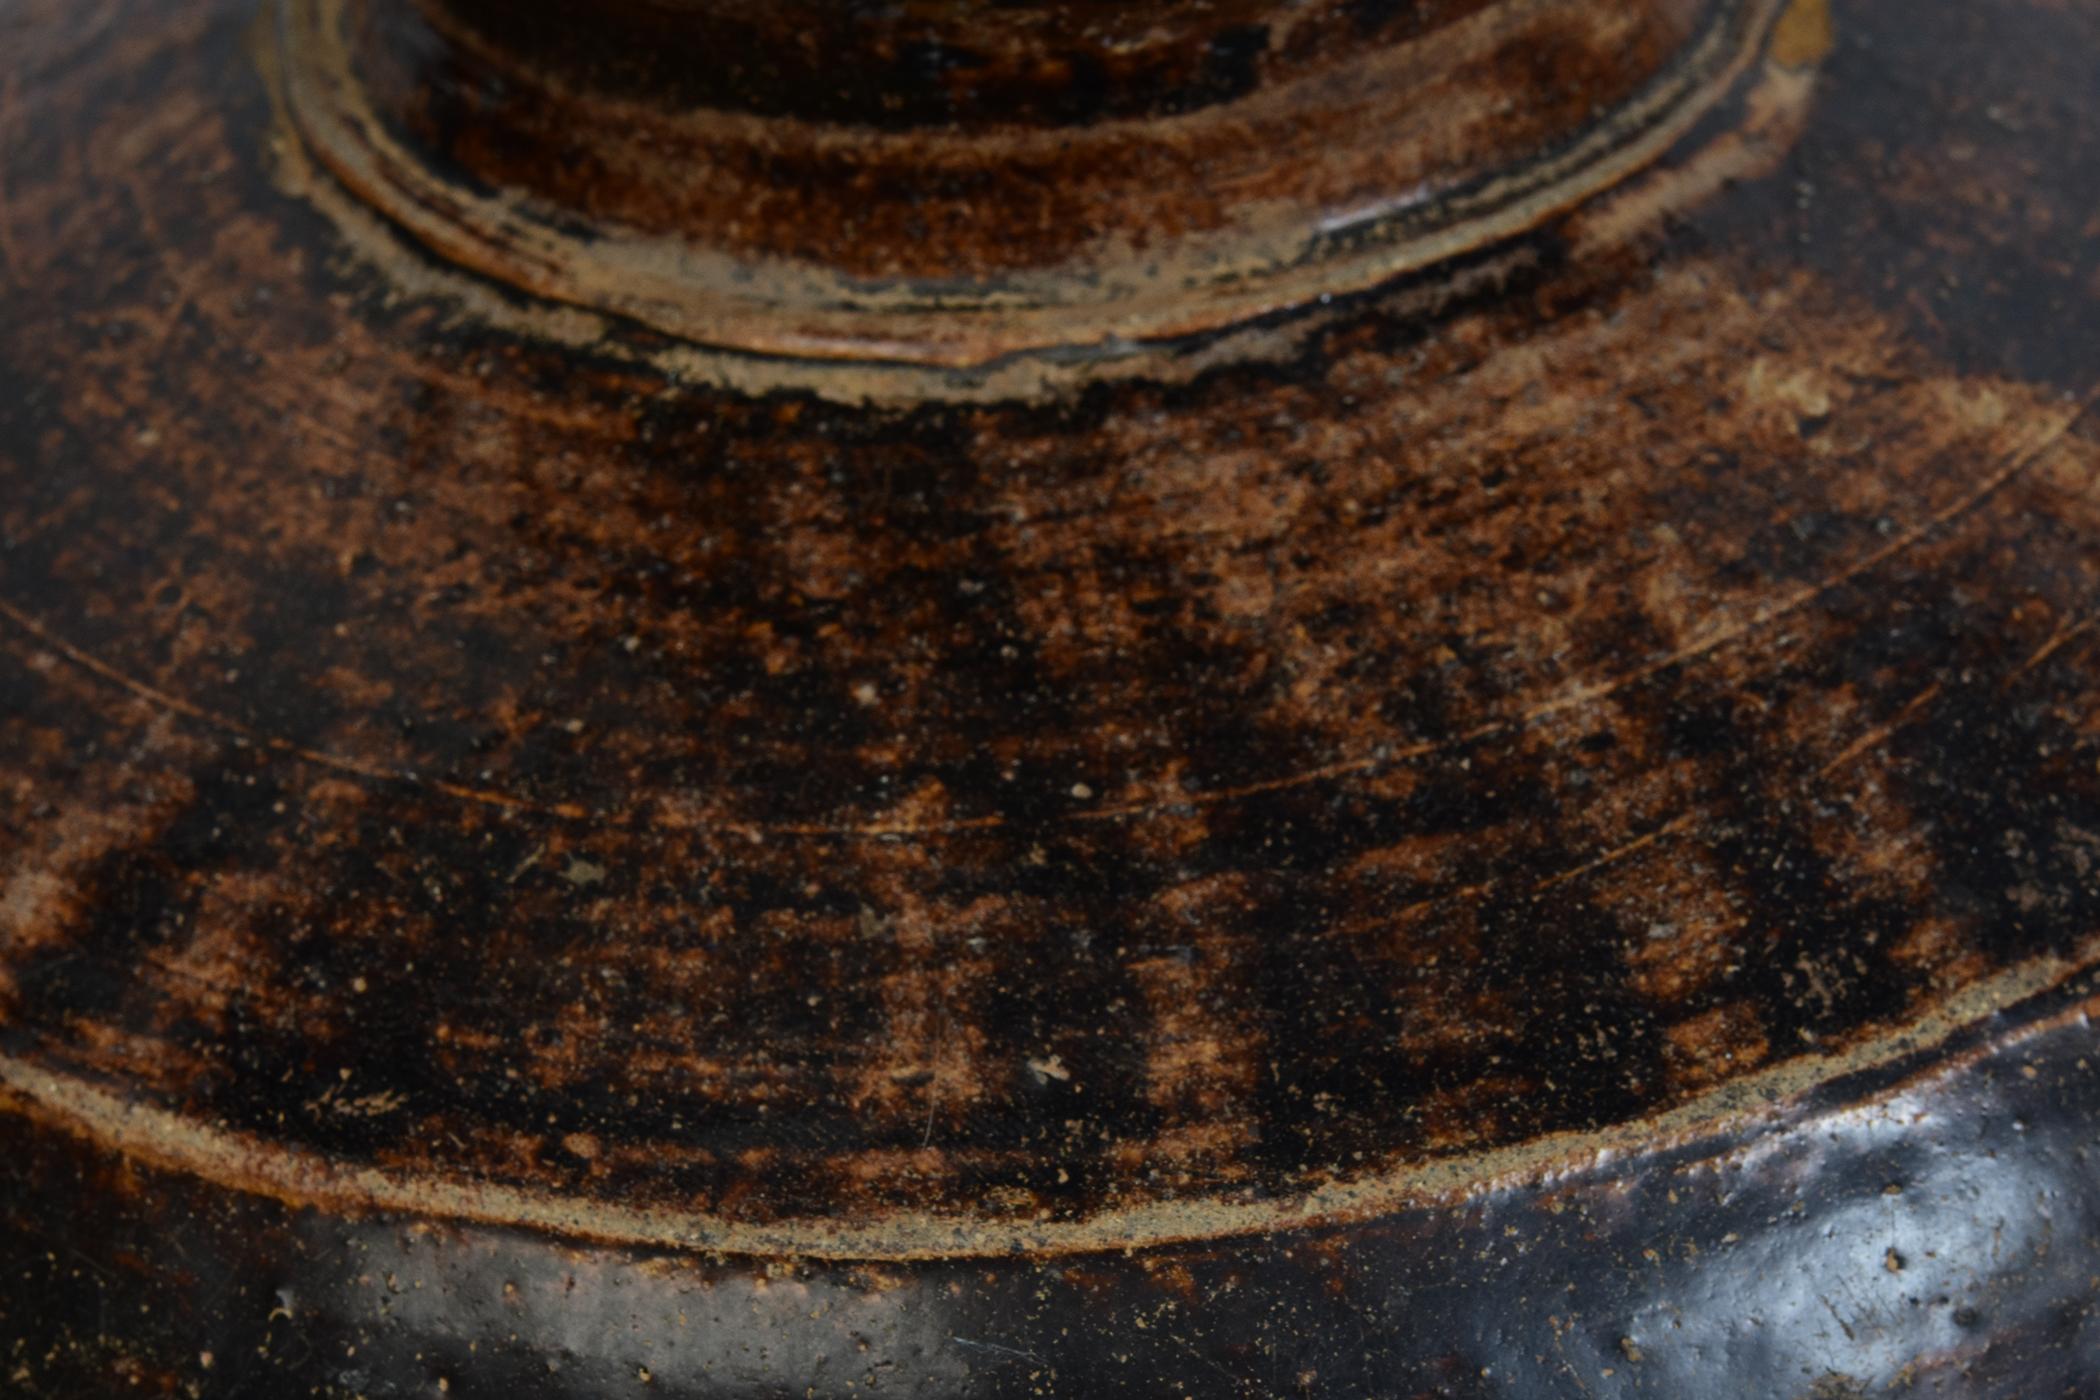 15th Century, Antique Thai Sankampaeng Pottery Ceramic Brown Glazed Jar In Good Condition For Sale In Sampantawong, TH